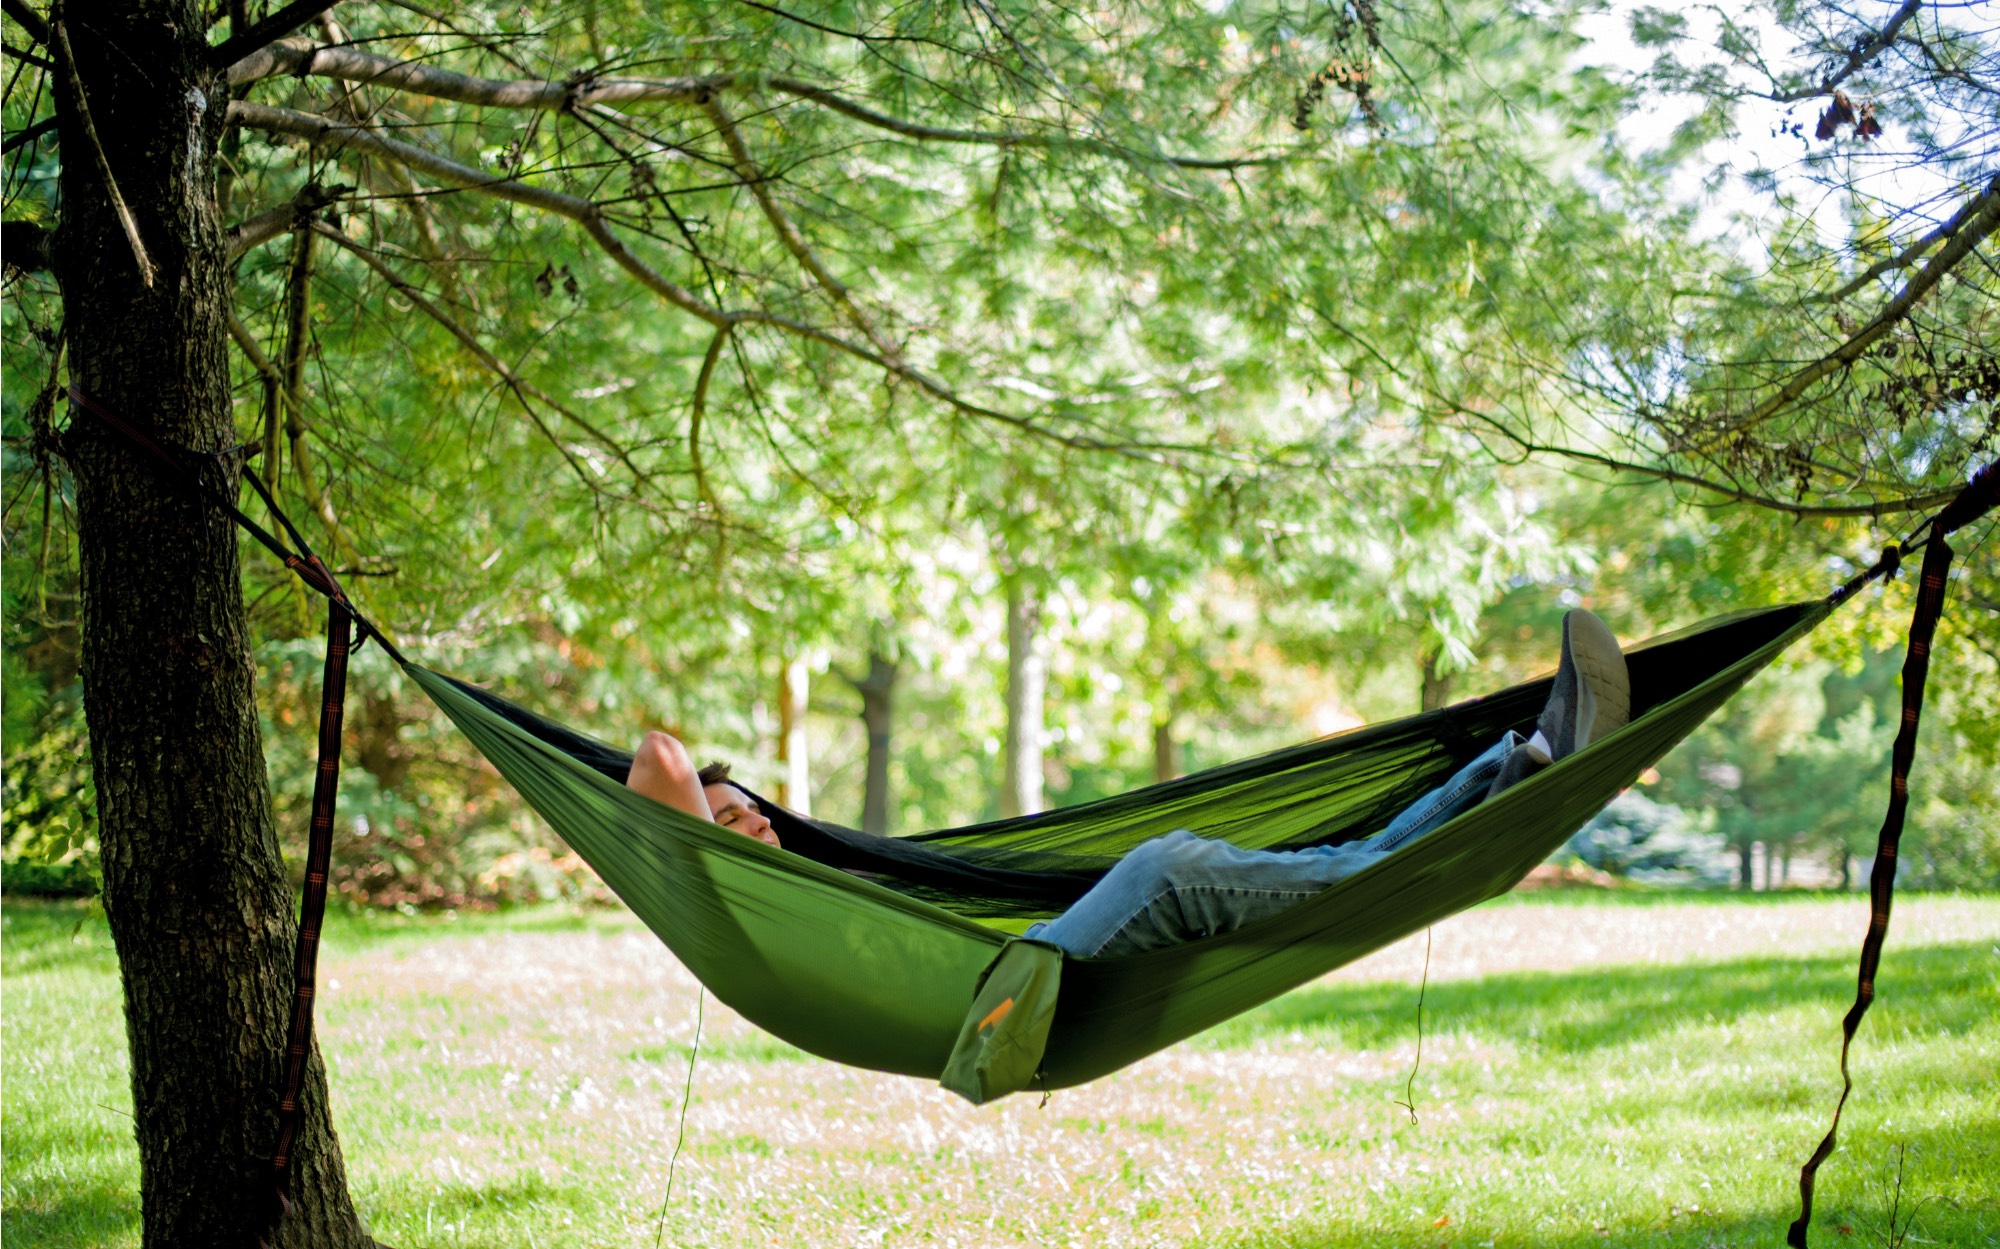 Student relaxes in hammock on campus